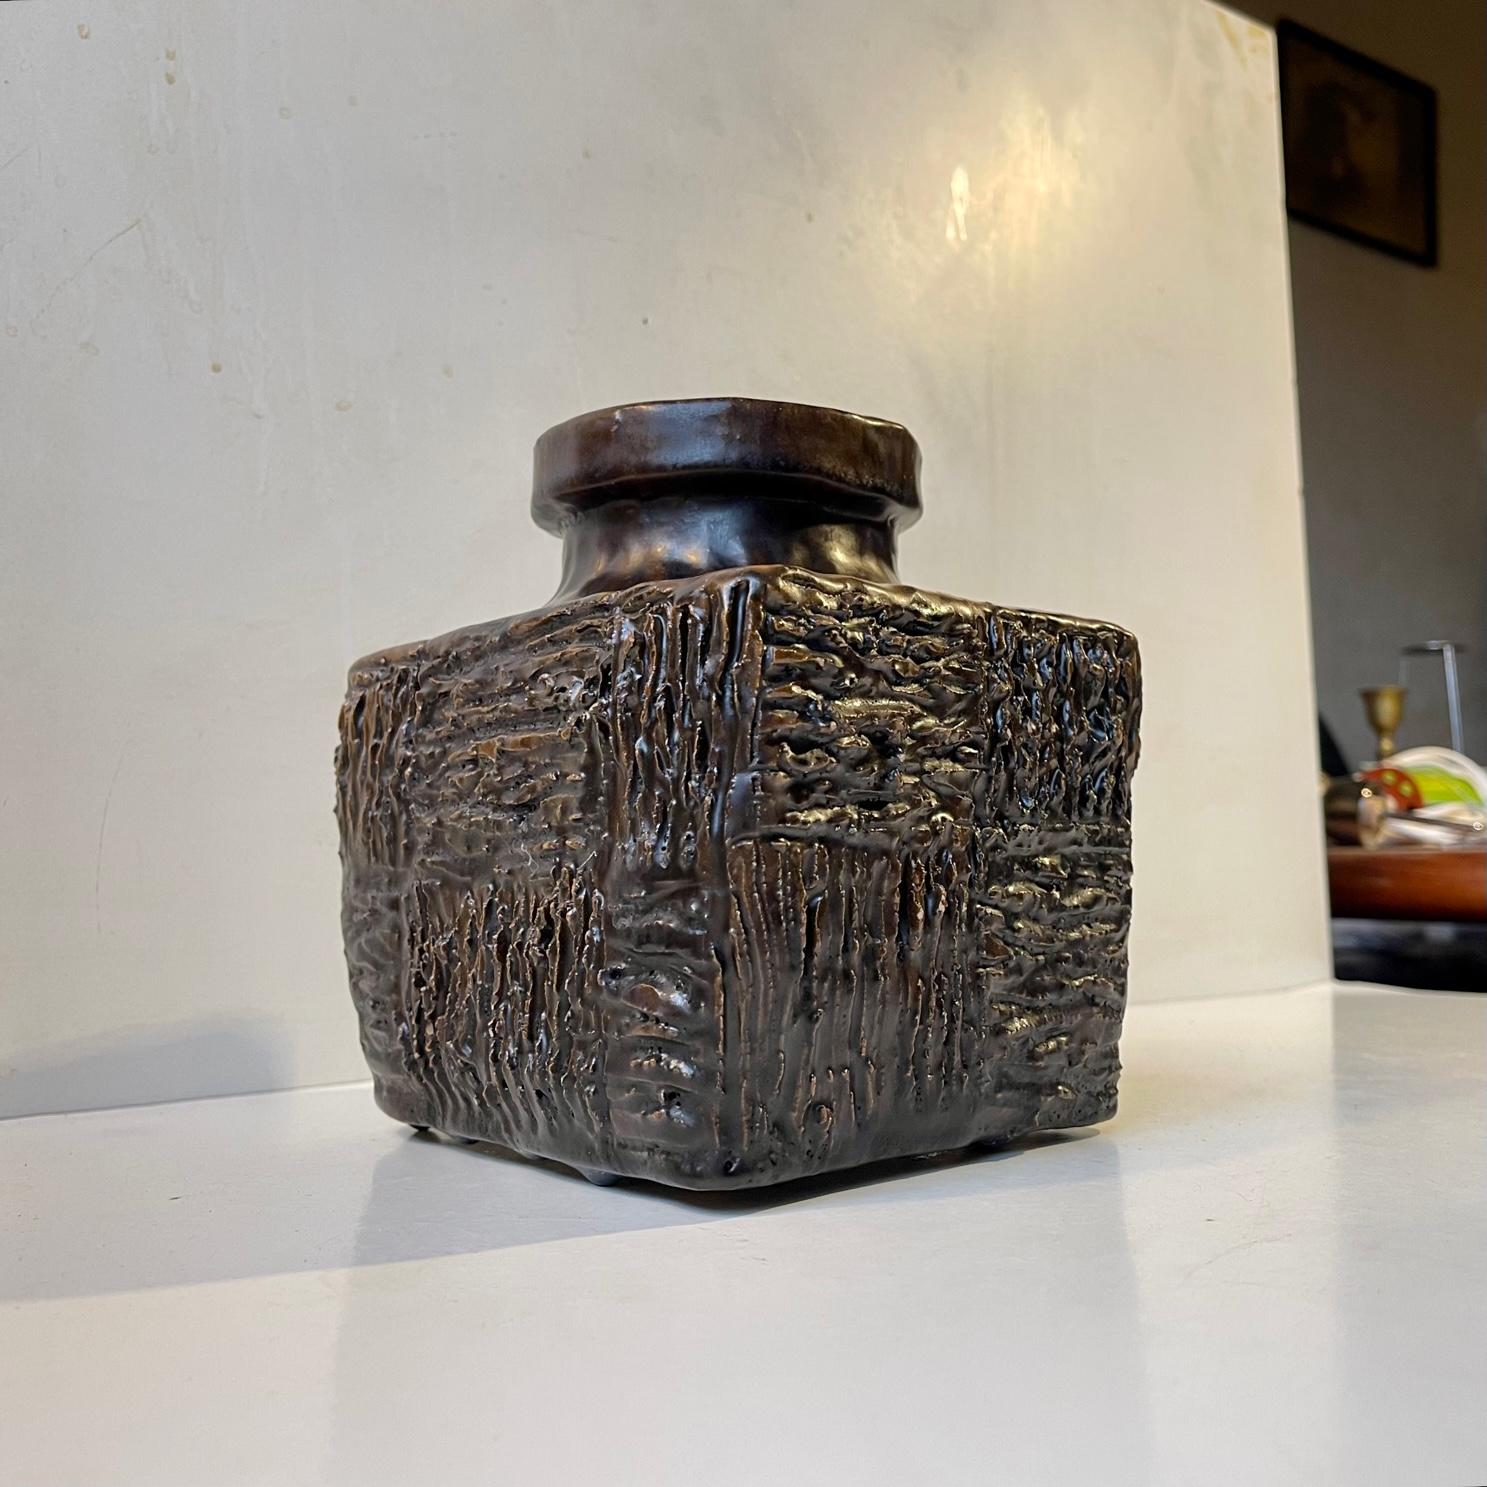 Interesting square - block shaped vase with Sgrafitto inspired incised ribbings with fat brown lava glaze. Its an unique piece by an unidentified Scandinavian Ceramist. It is hand signed and dated 1971. Measurements: H: 17 cm, W: 15 cm, Dept: 14 cm.